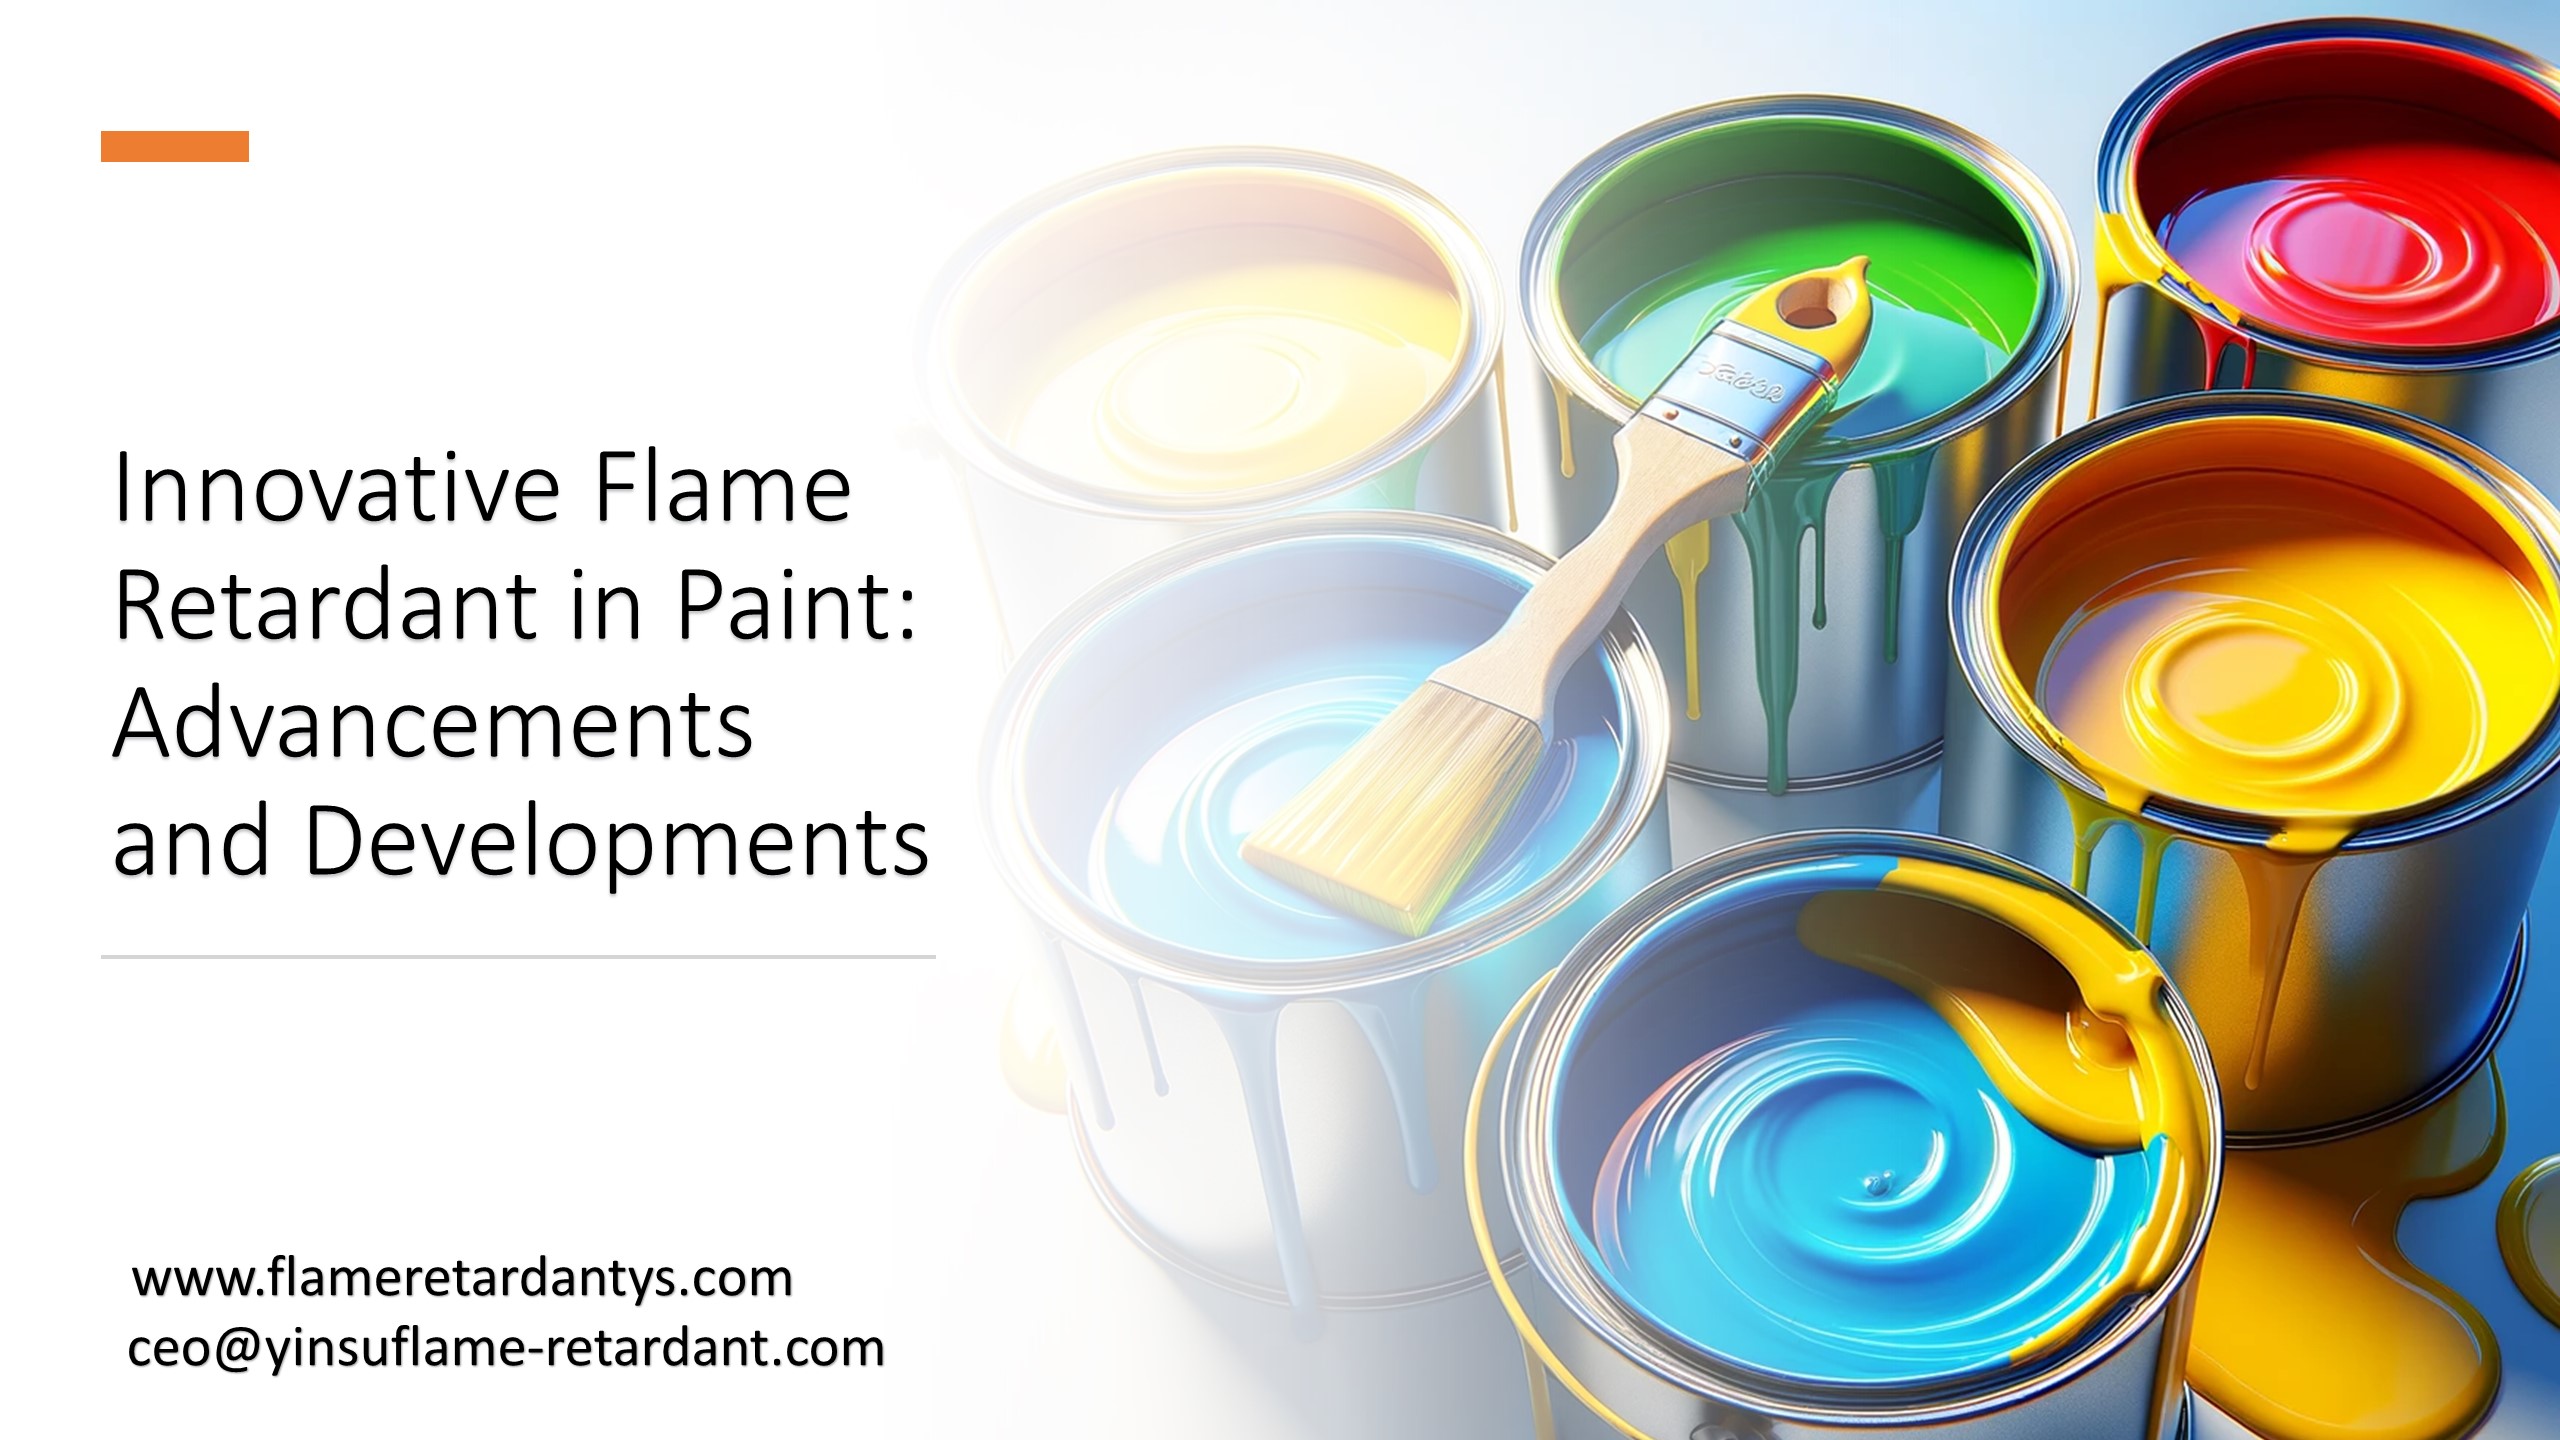 Innovative Flame Retardant in Paint: Advancements and Developments